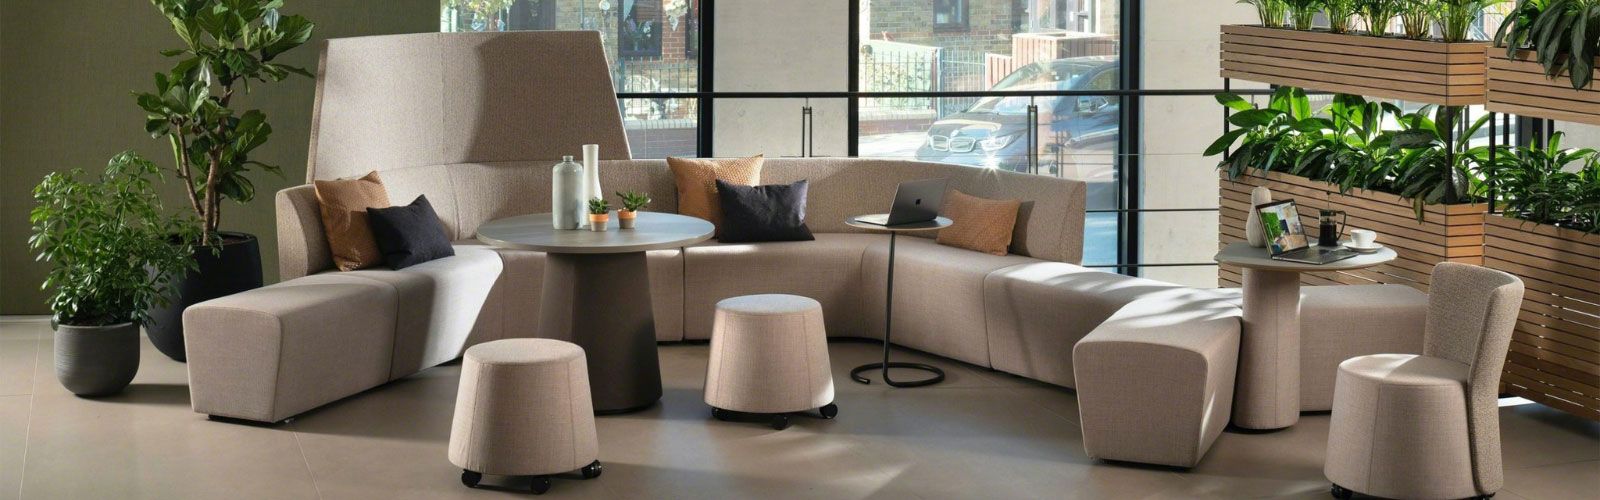 Away from desk modular seating in modern office